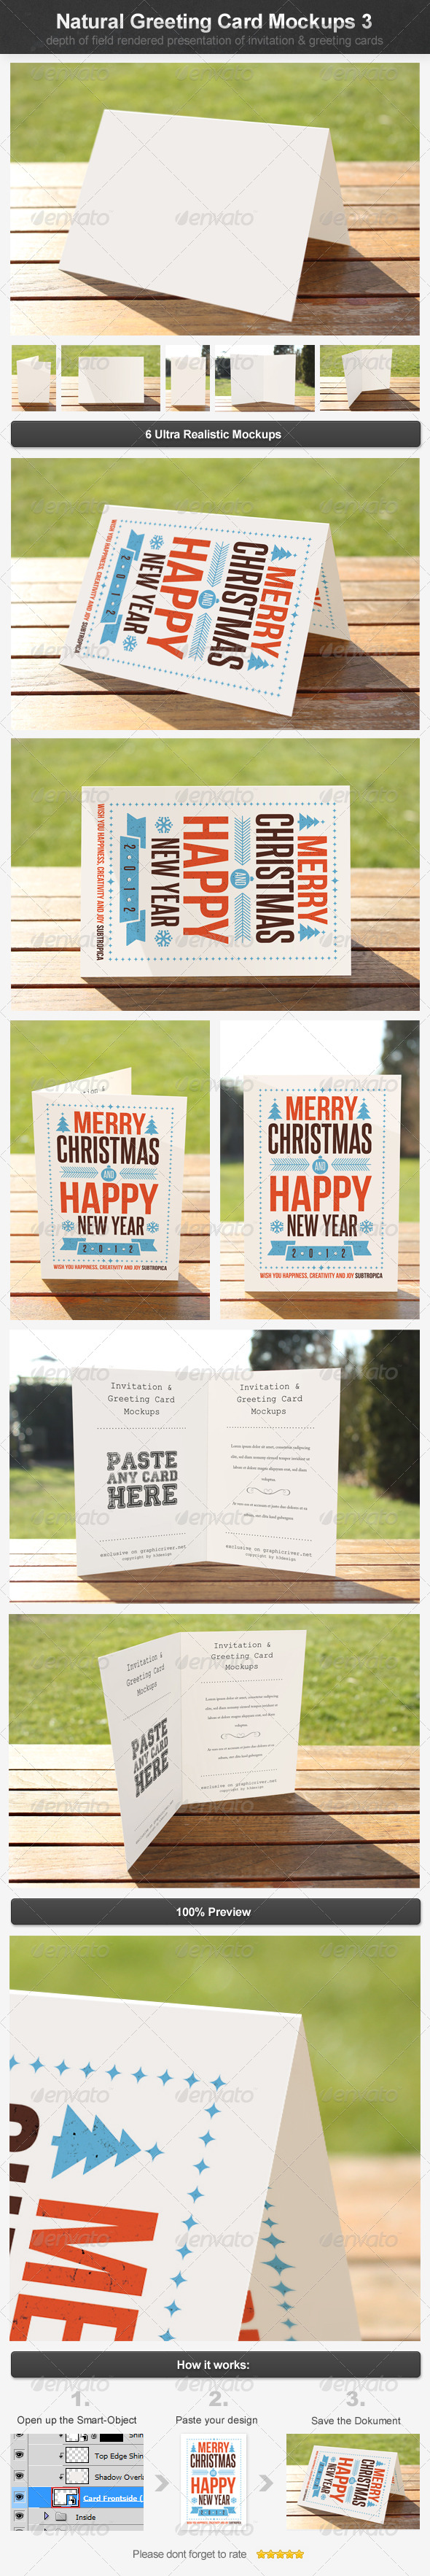 Natural Greeting Card Mockups 3 by h3design | GraphicRiver